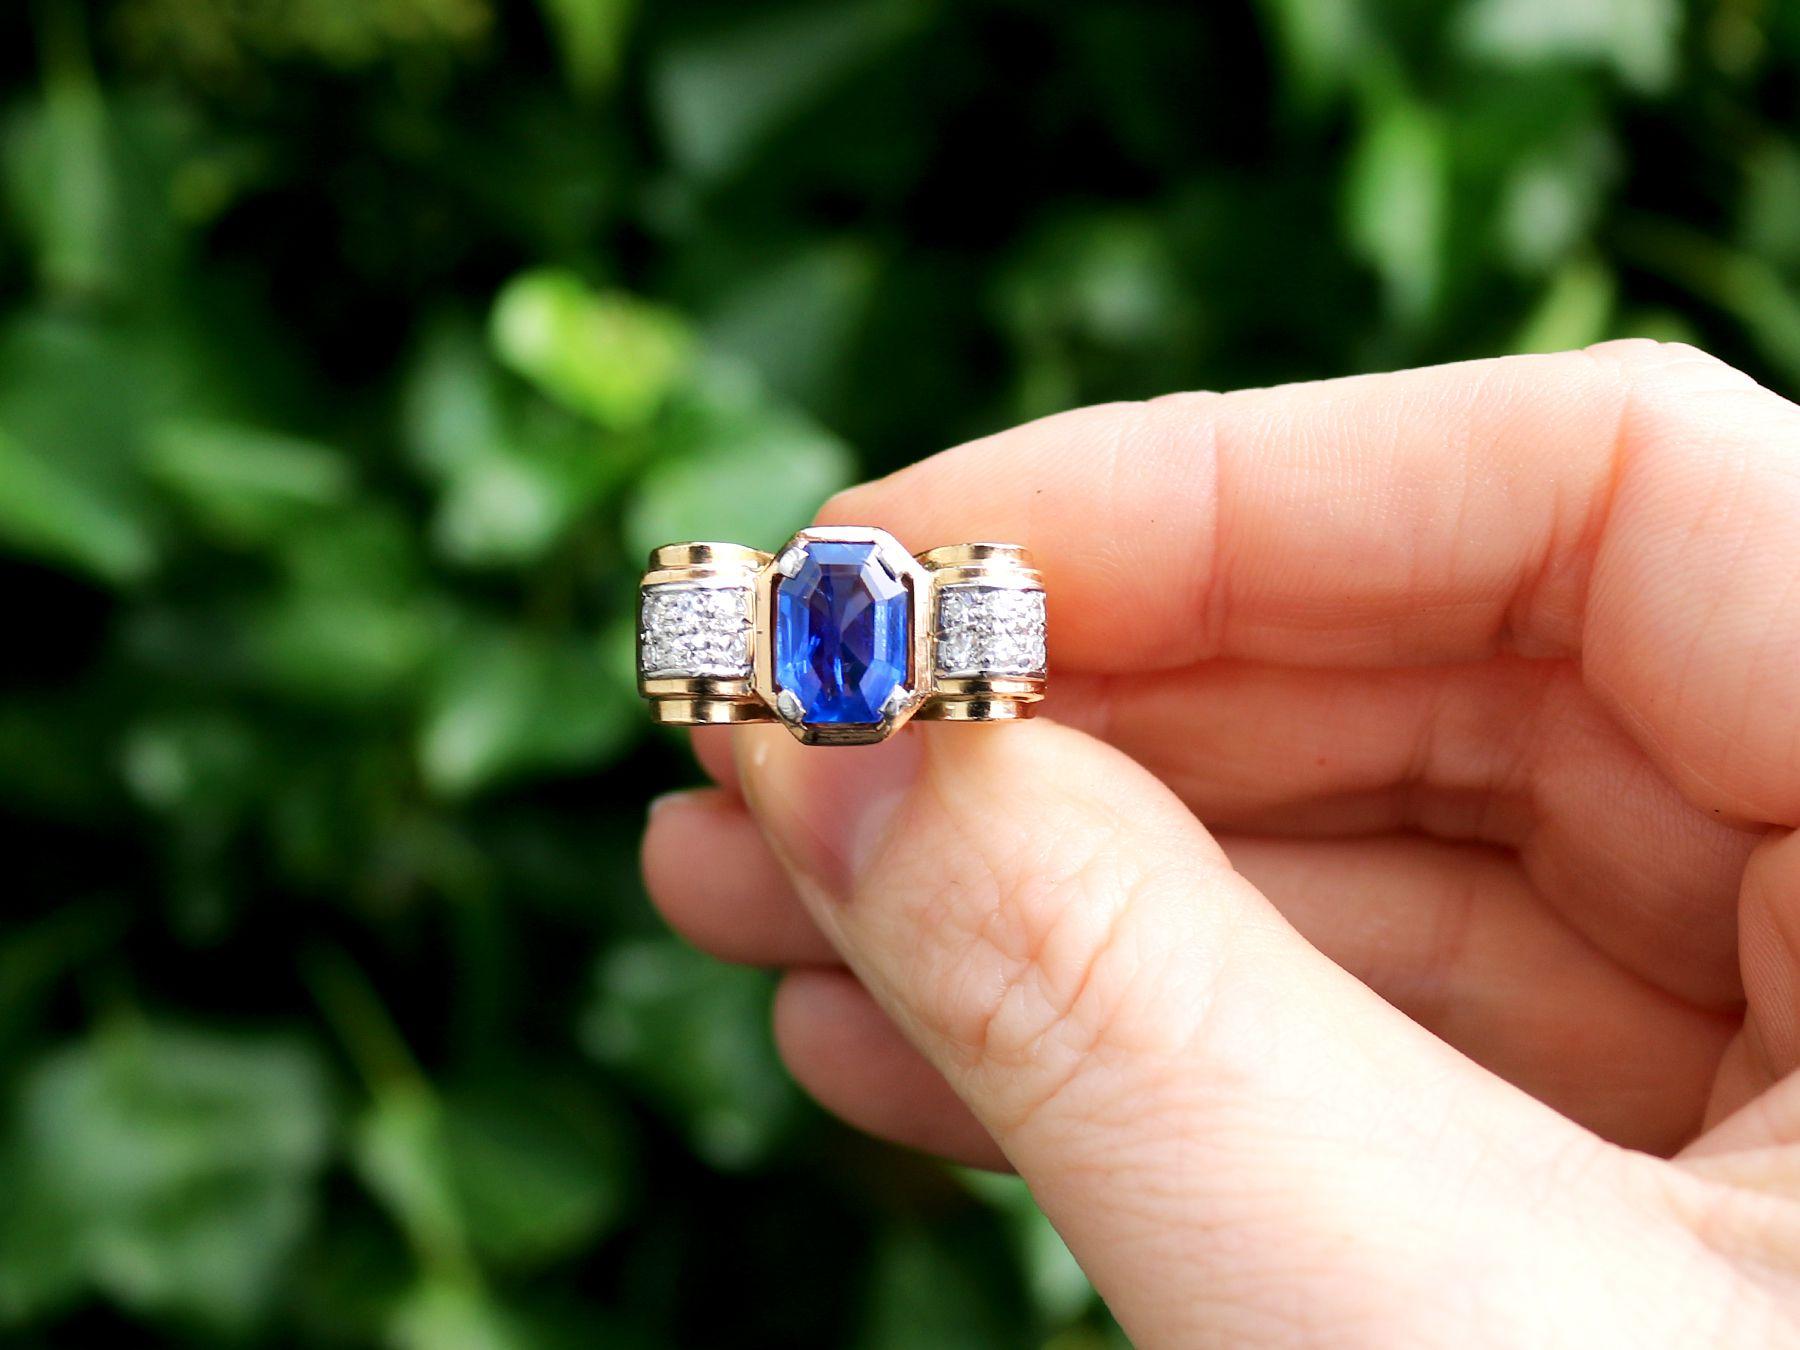 A stunning, fine and impressive antique Art Deco 2.82 carat Burmese sapphire and 0.24 carat diamond, 18 karat yellow and white gold cocktail ring; part of our diverse gemstone jewelry and estate jewelry collections

This stunning, fine and